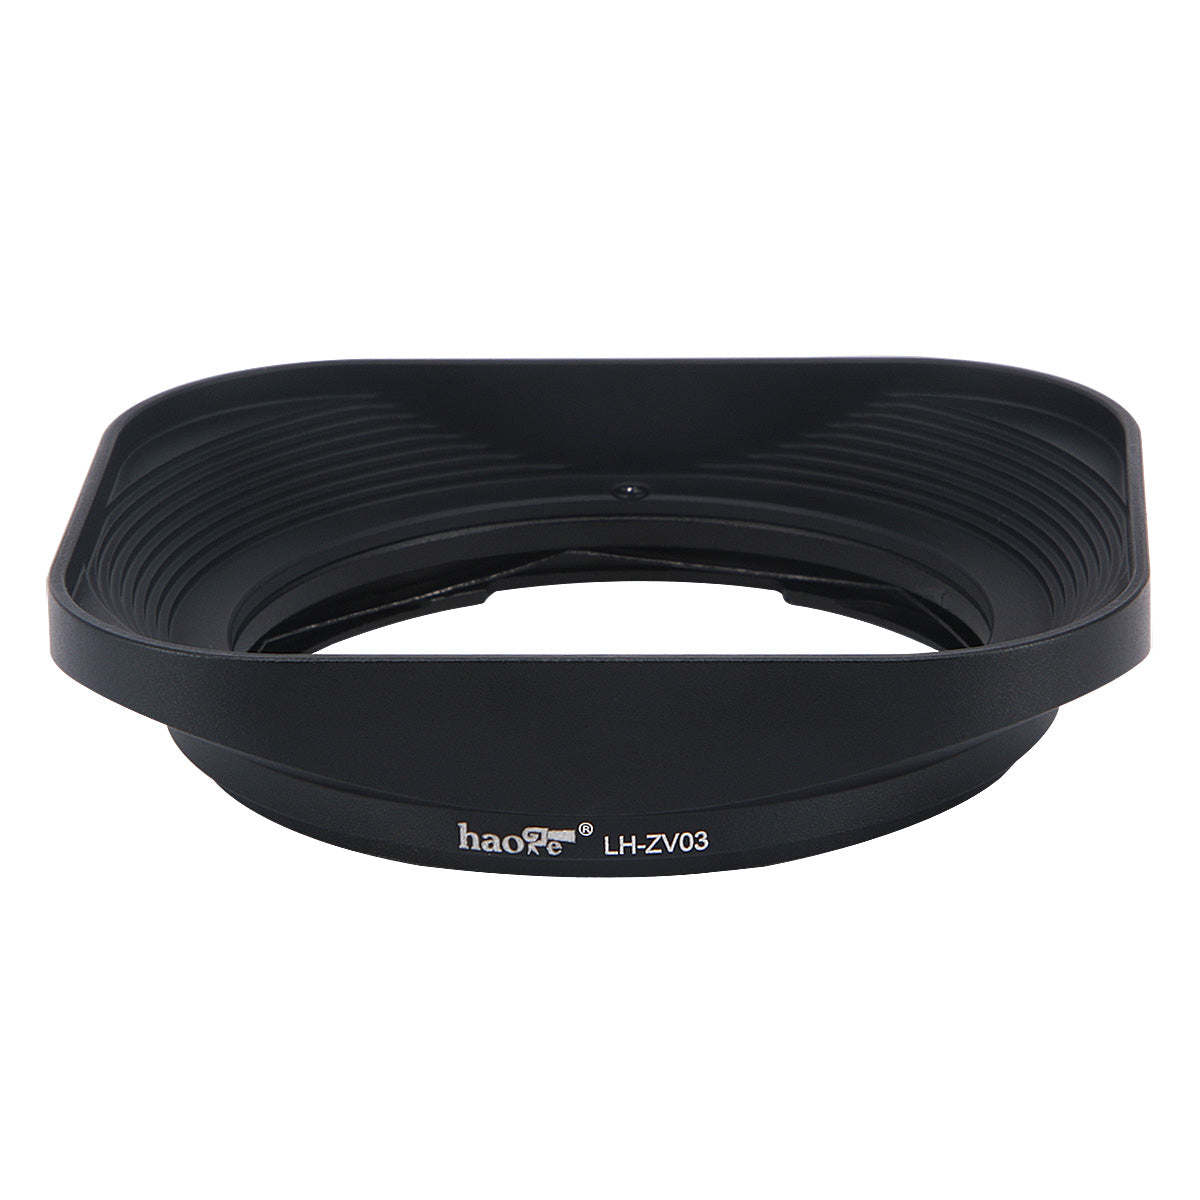 Haoge LH-ZV03 Square Metal Lens Hood for Carl Zeiss Distagon T